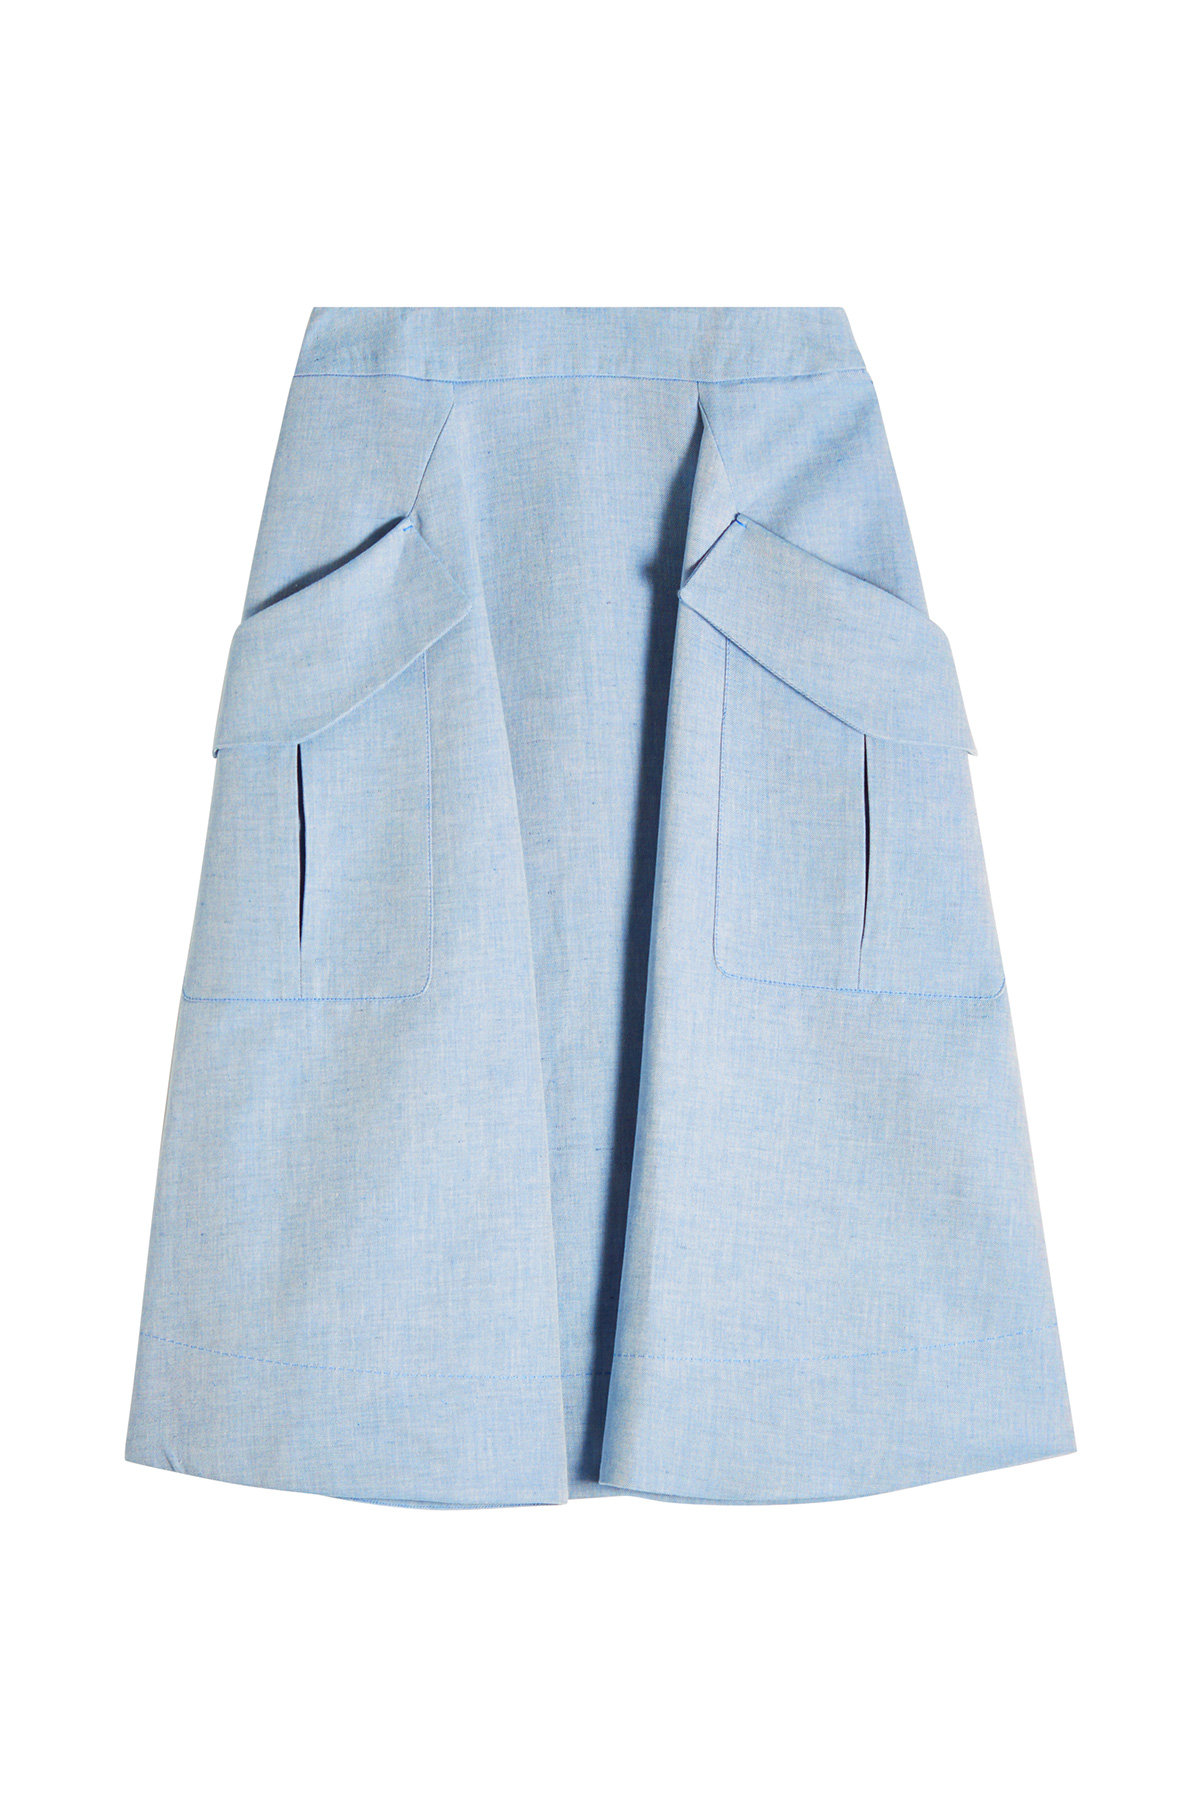 Carven - A-Line Skirt with Oversized Pockets